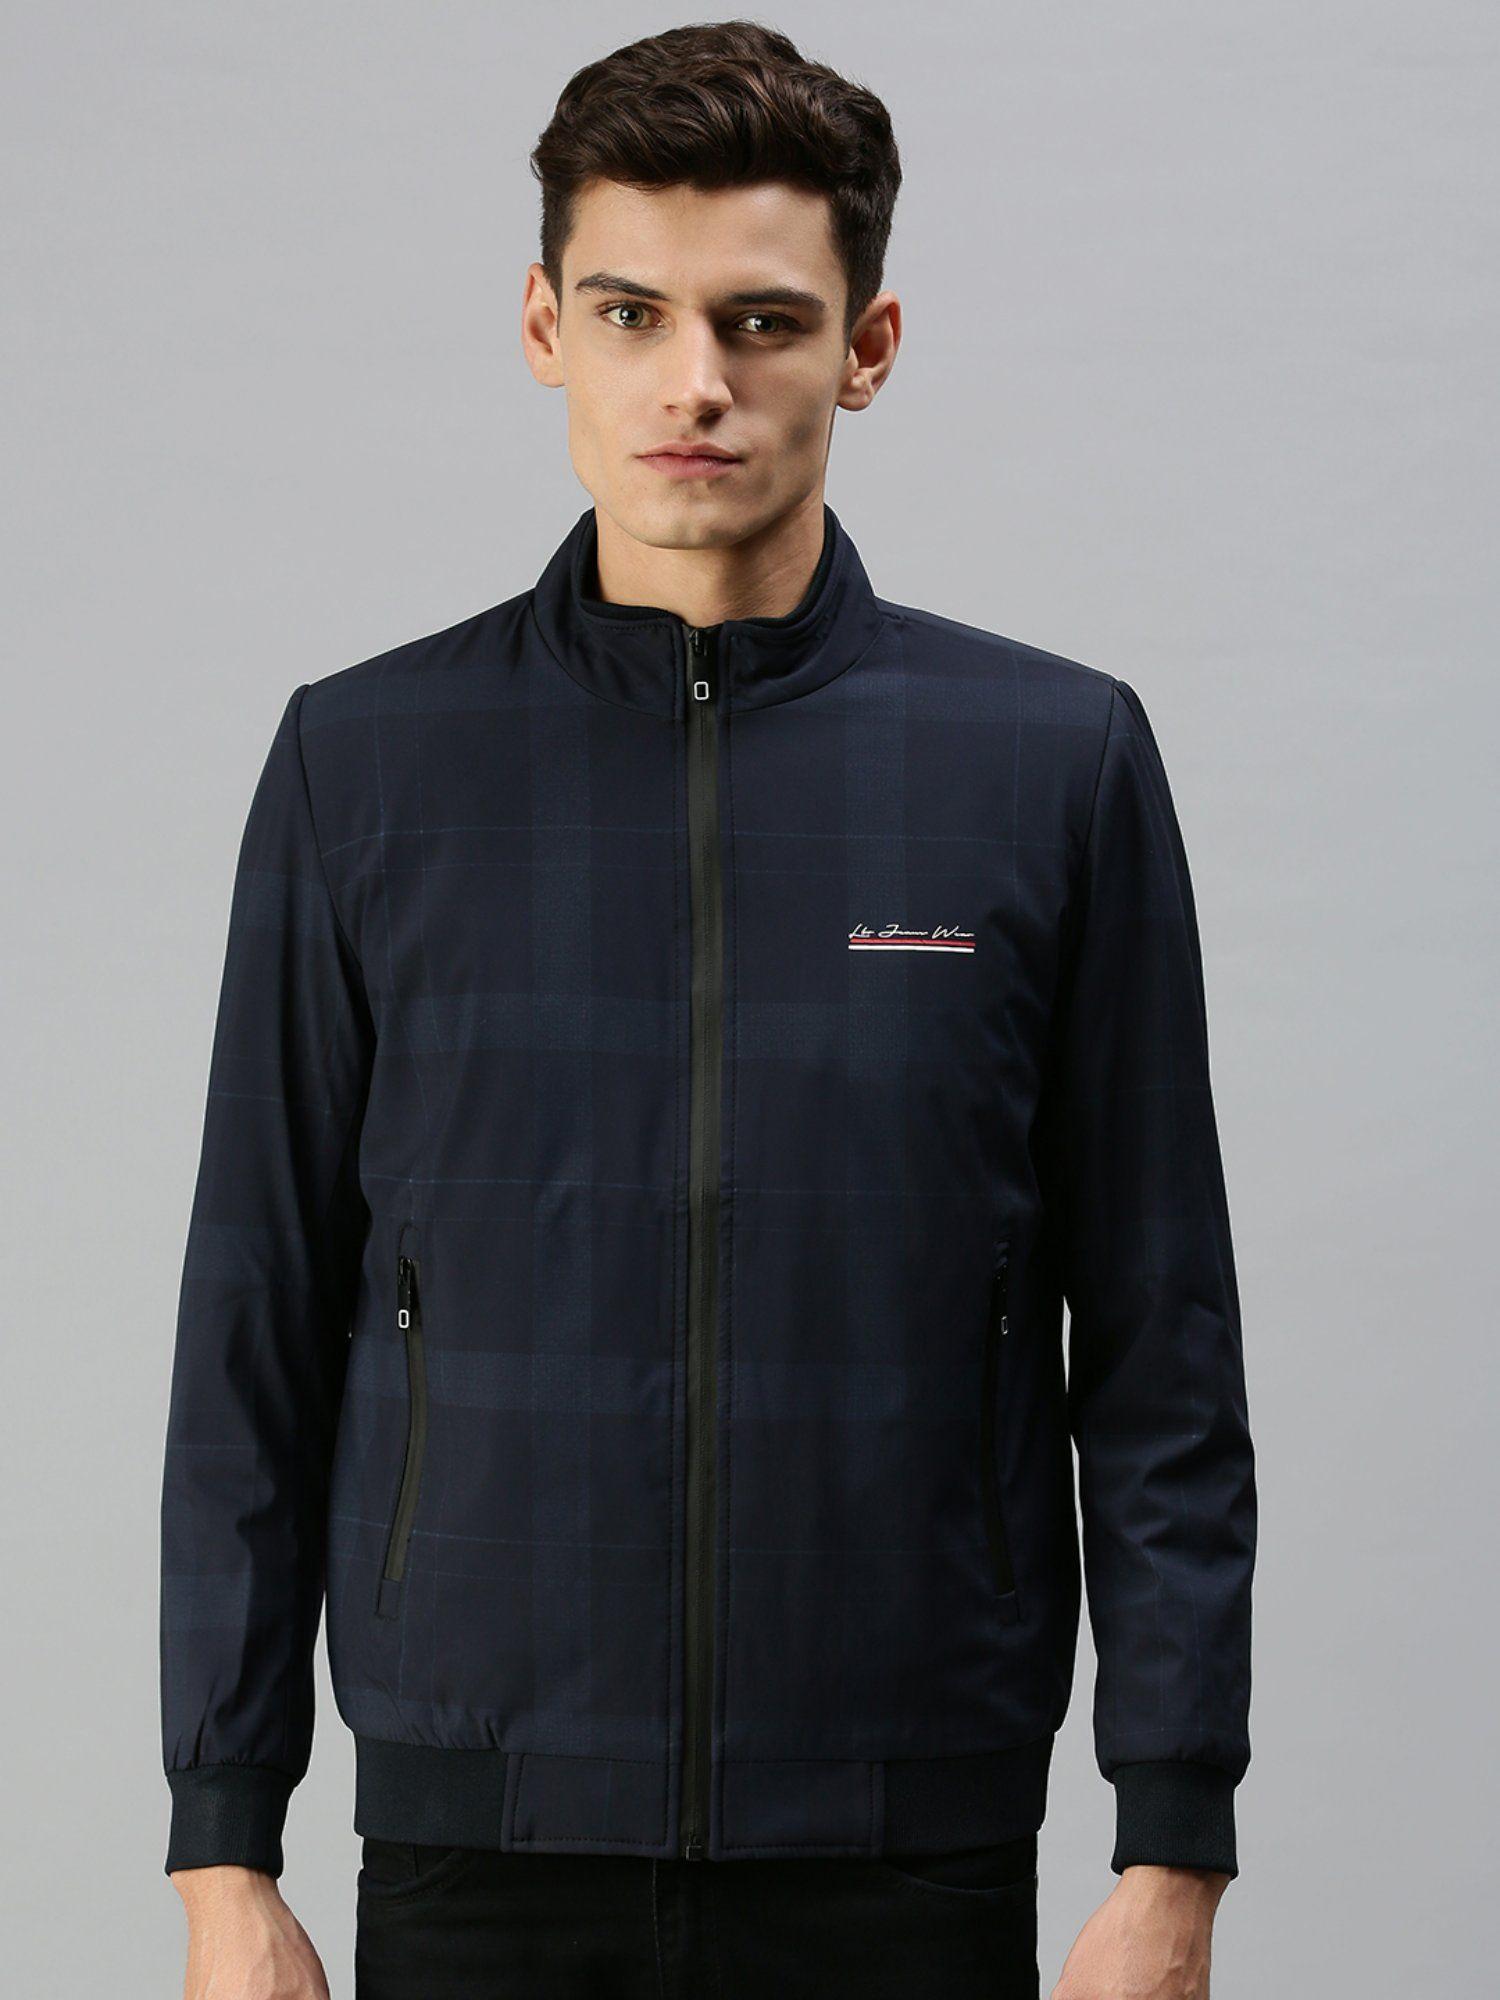 men-casual-checked-navy-blue-jacket